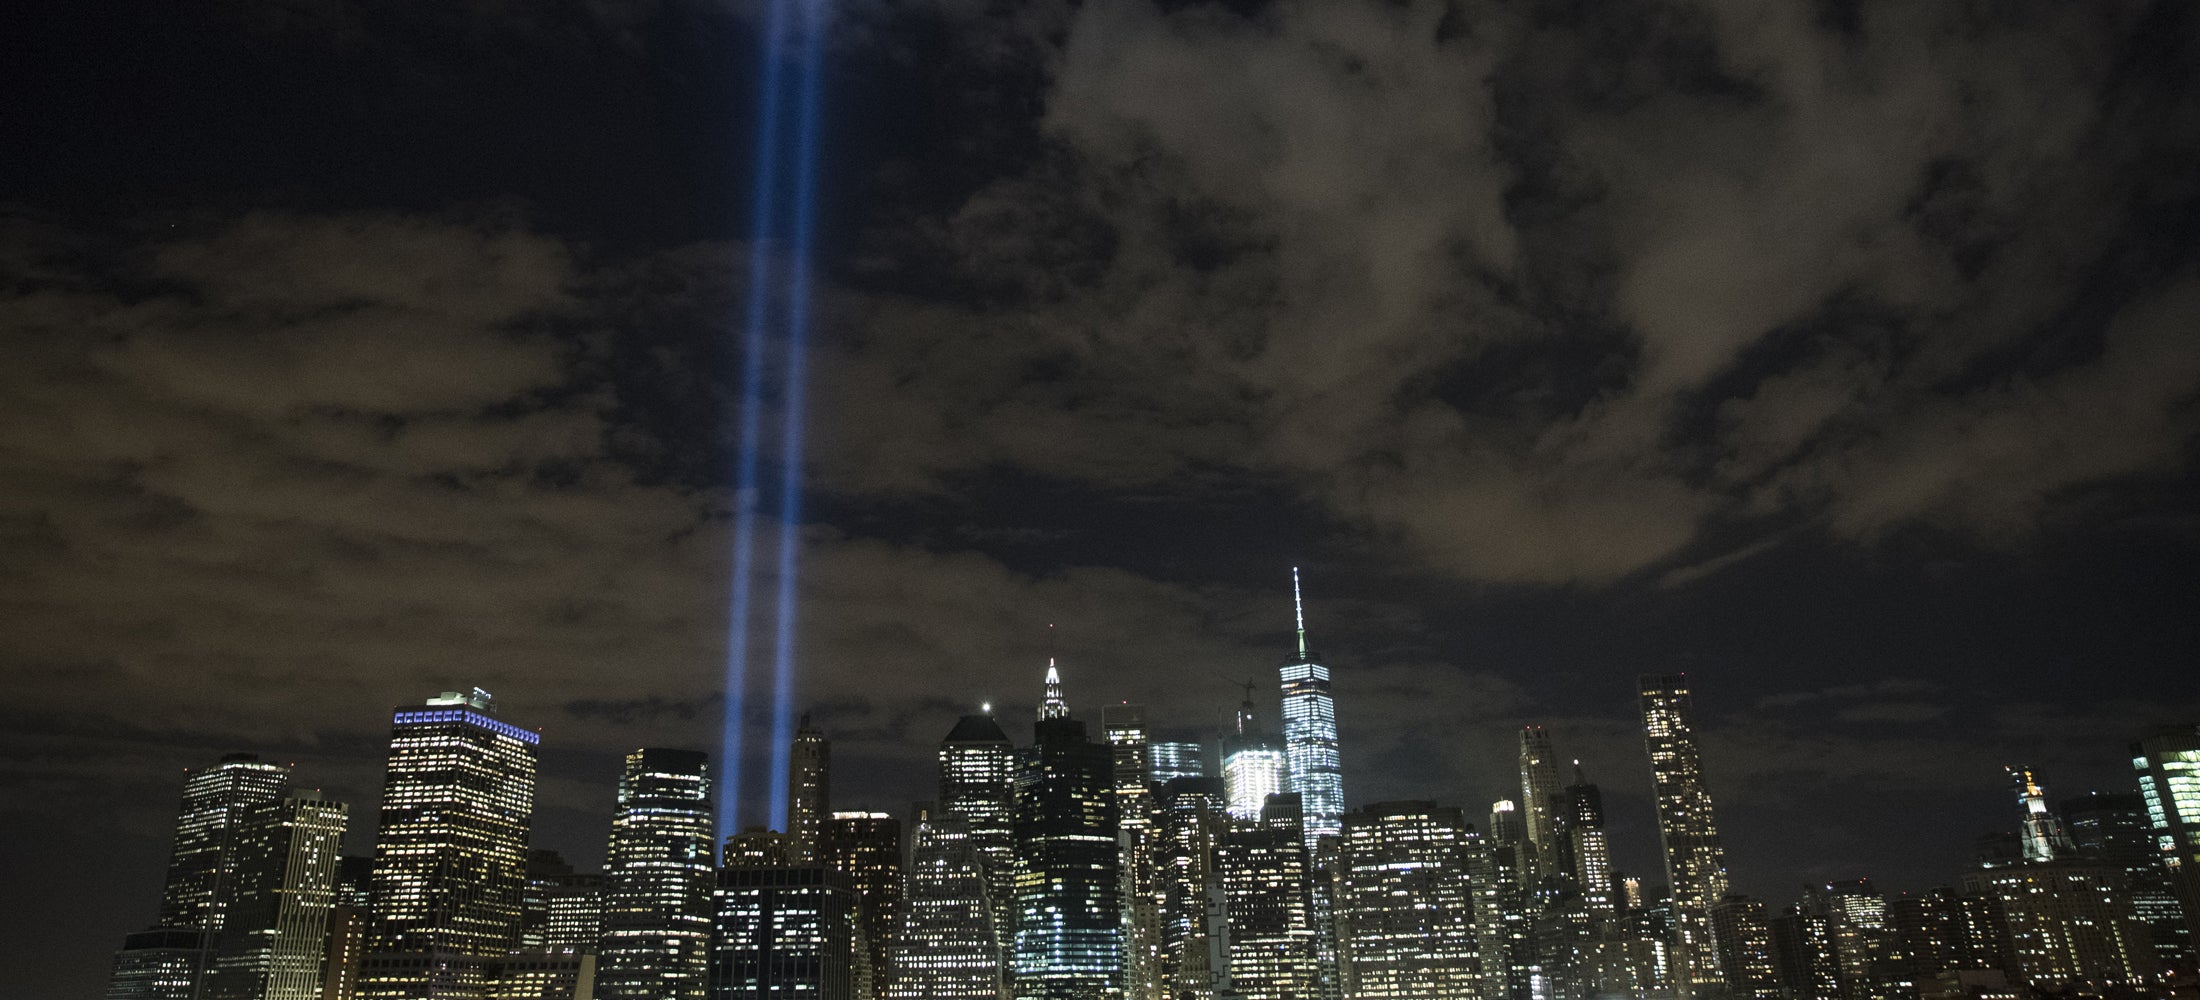 timeline for the day of the september 11 attacks